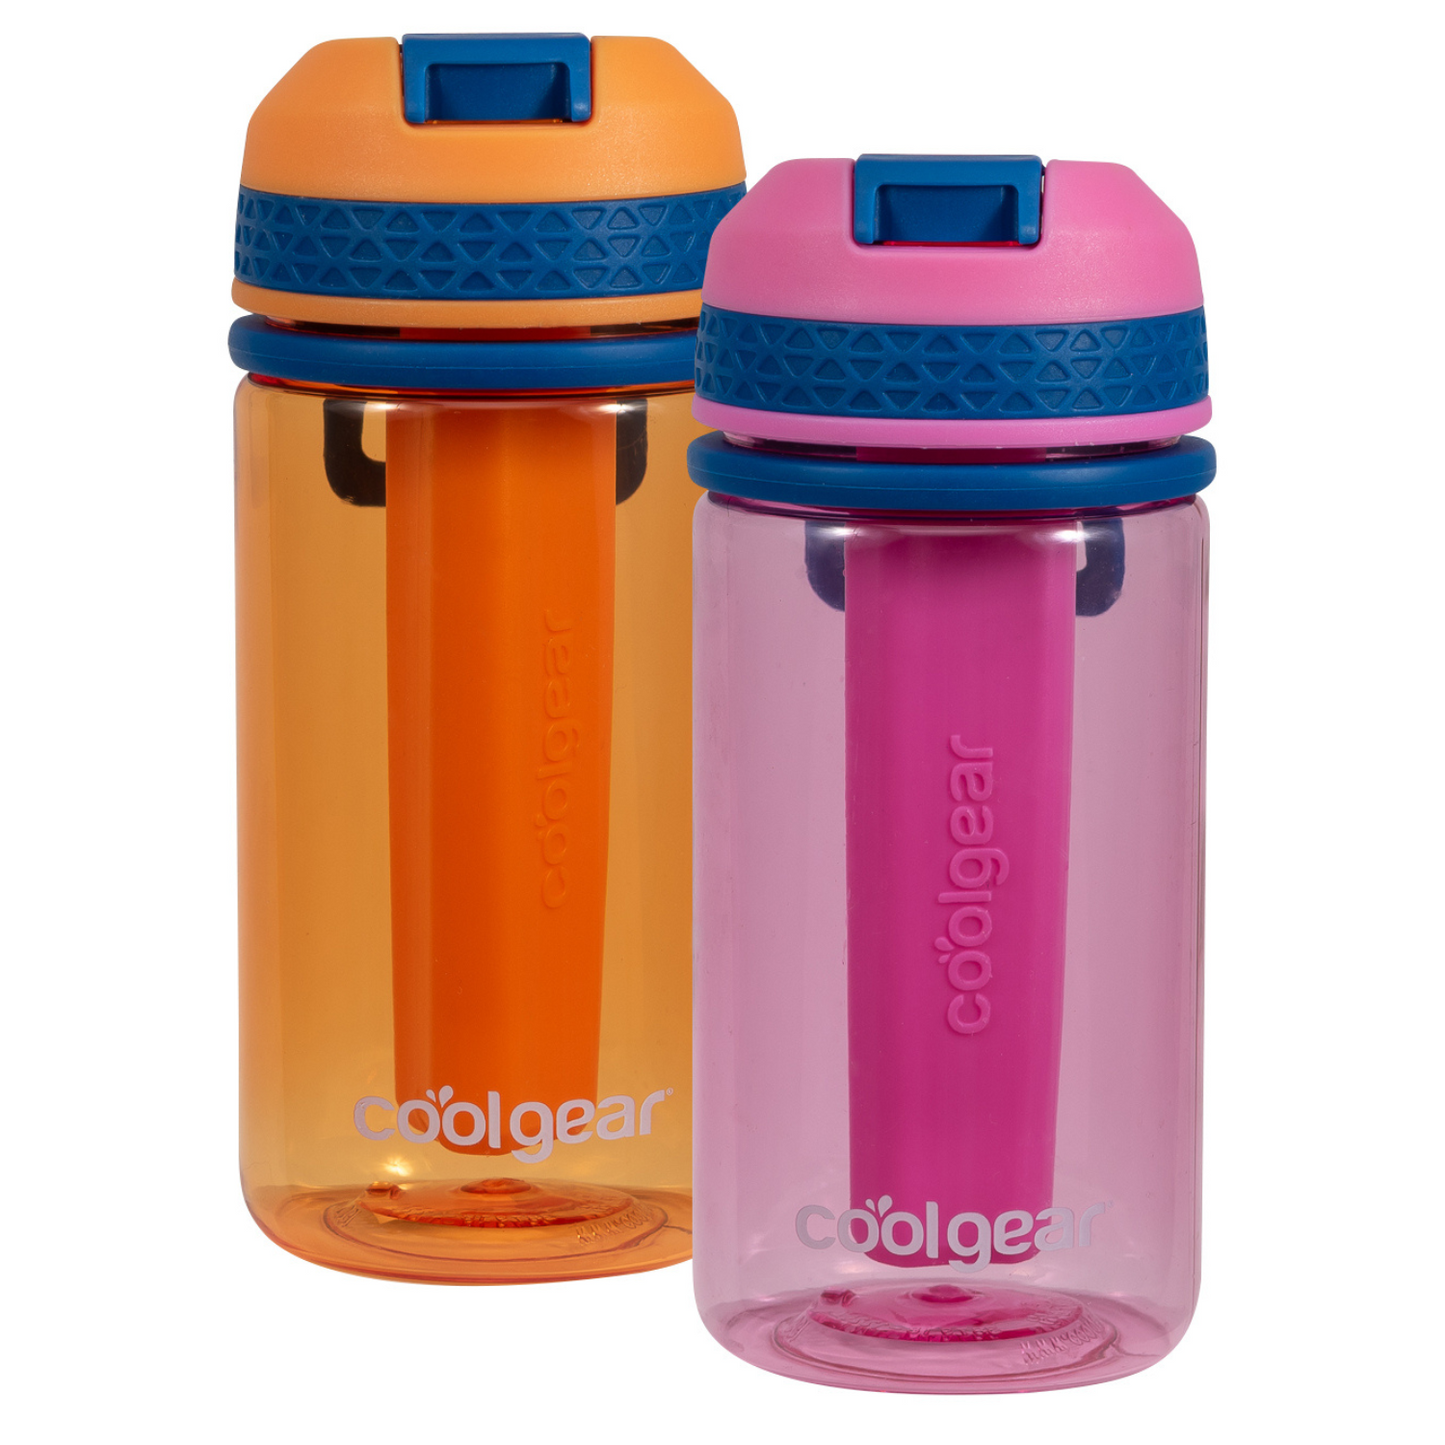 Cool Gear Tritan Shatter Resistant Leakproof Water Bottle, Textured Silicone Band with Sipper Lid, 18 Ounce, 2 Pack